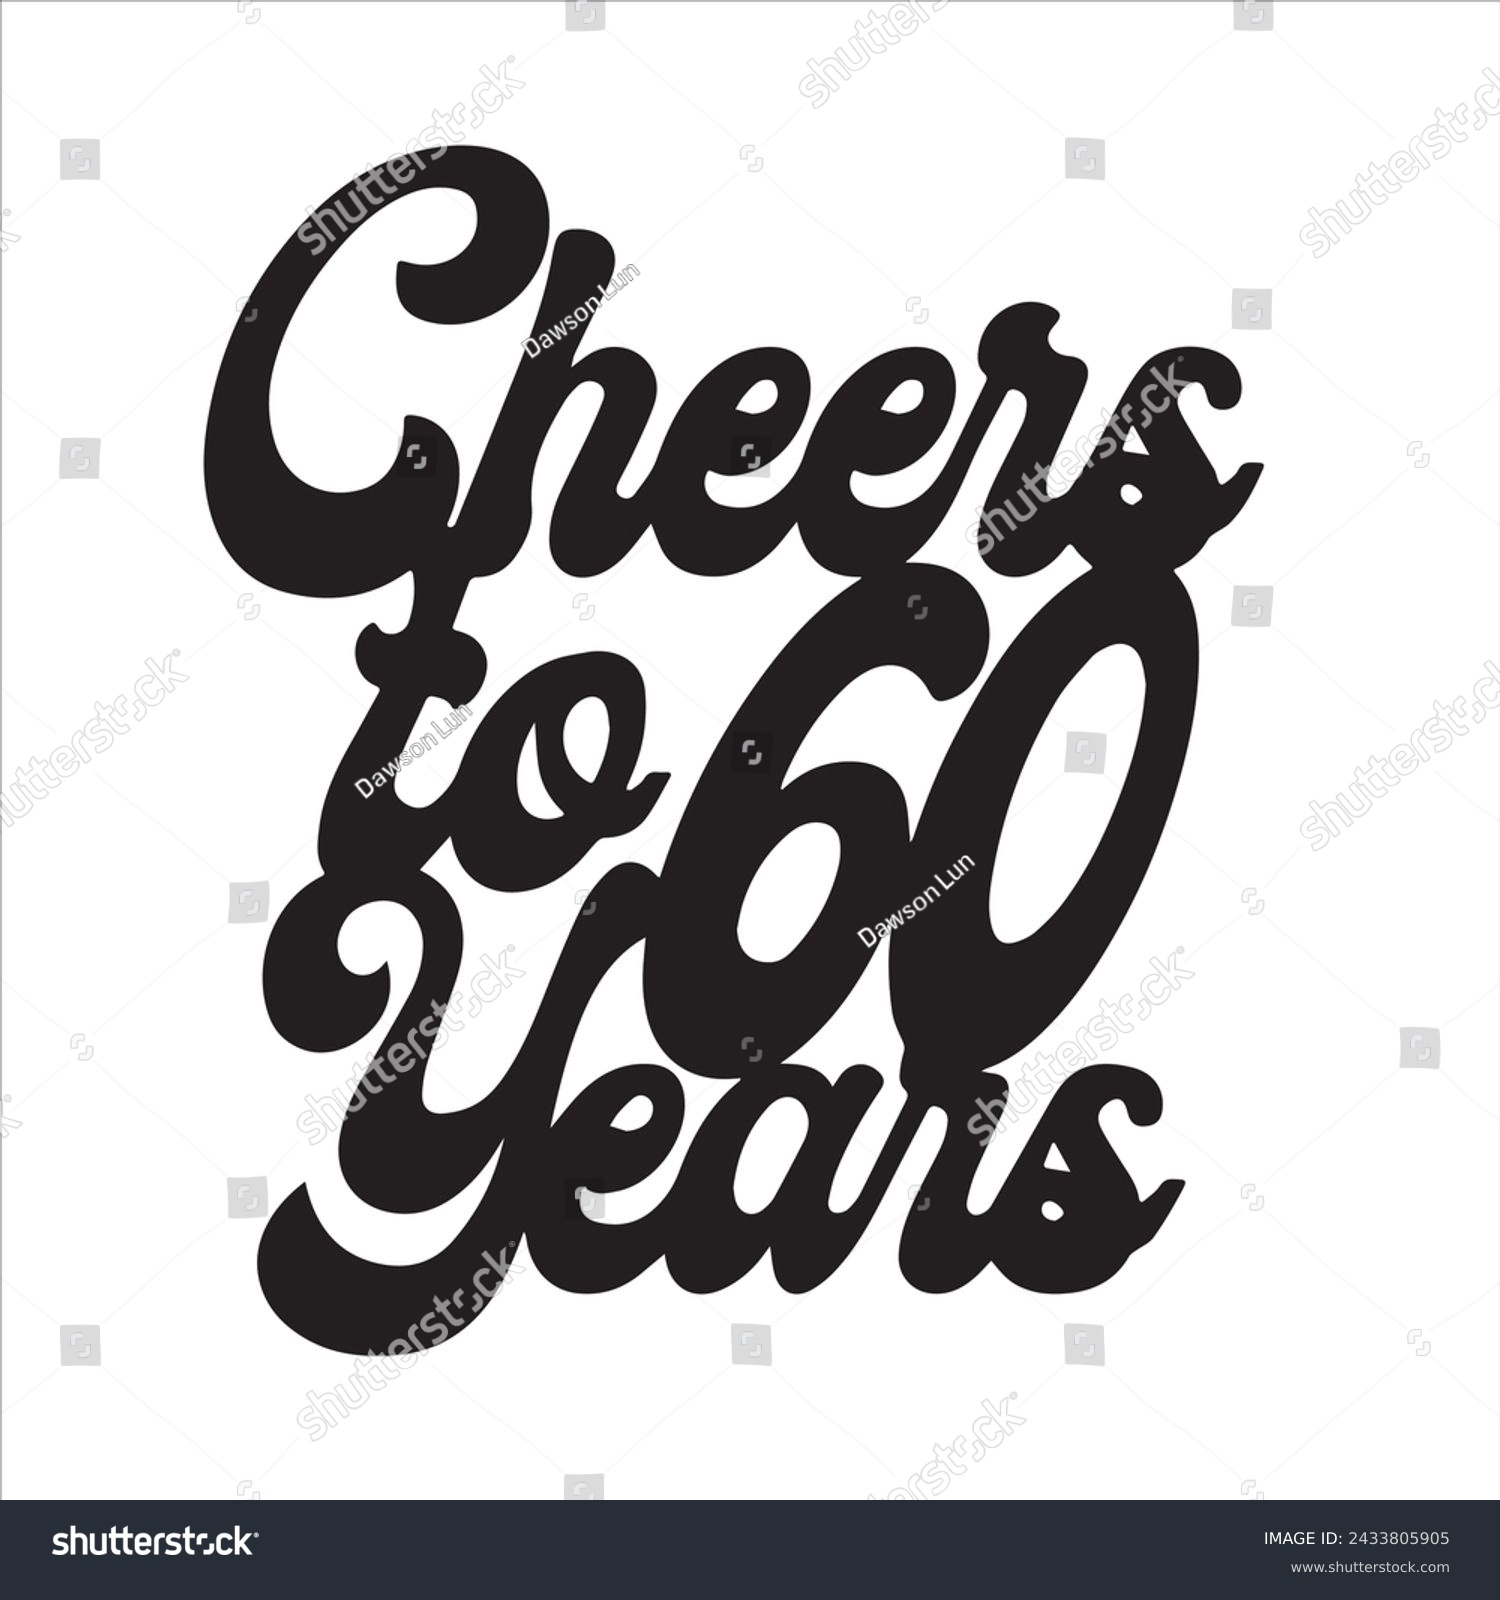 SVG of cheers to 60 years background inspirational positive quotes, motivational, typography, lettering design svg